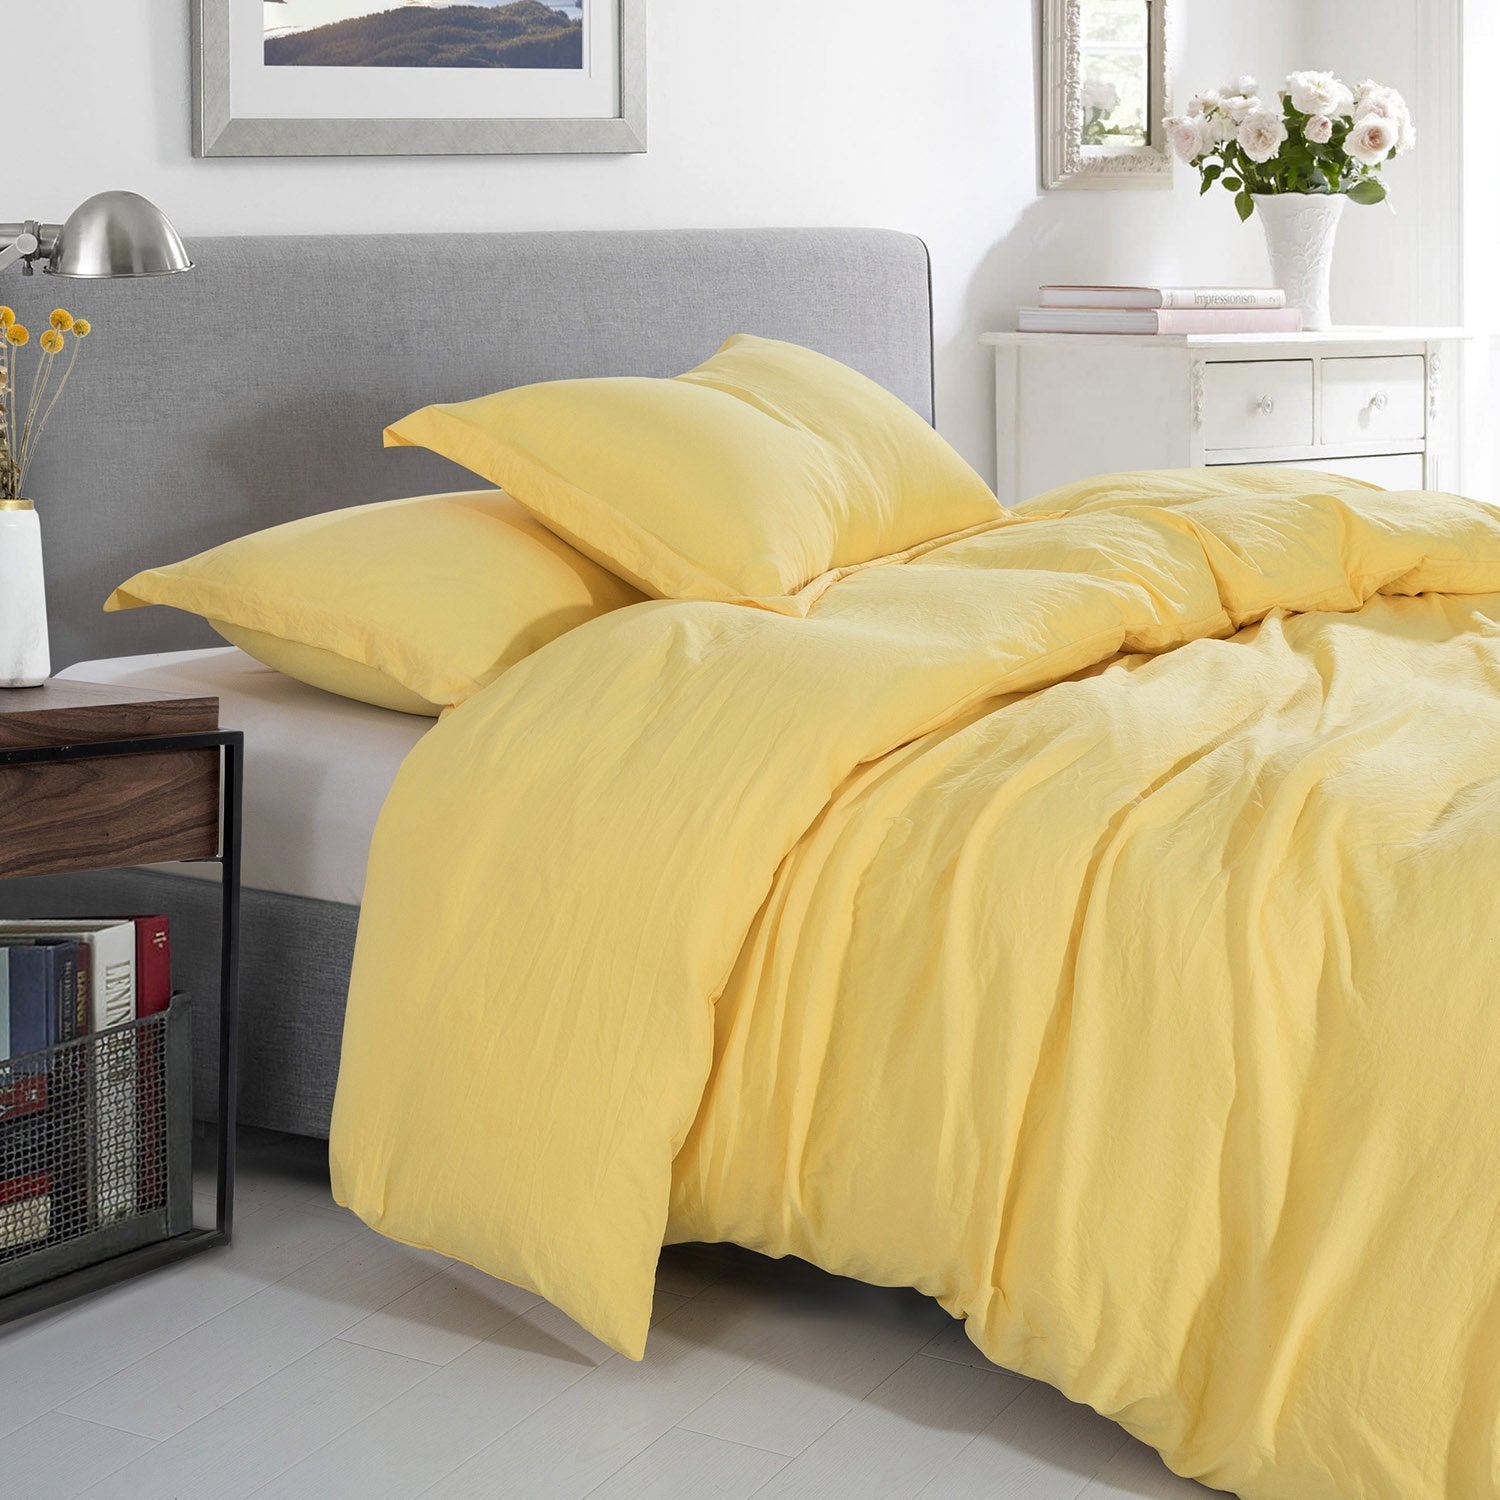 Washed Crinkled Duvet Cover Set Yellow - Bed